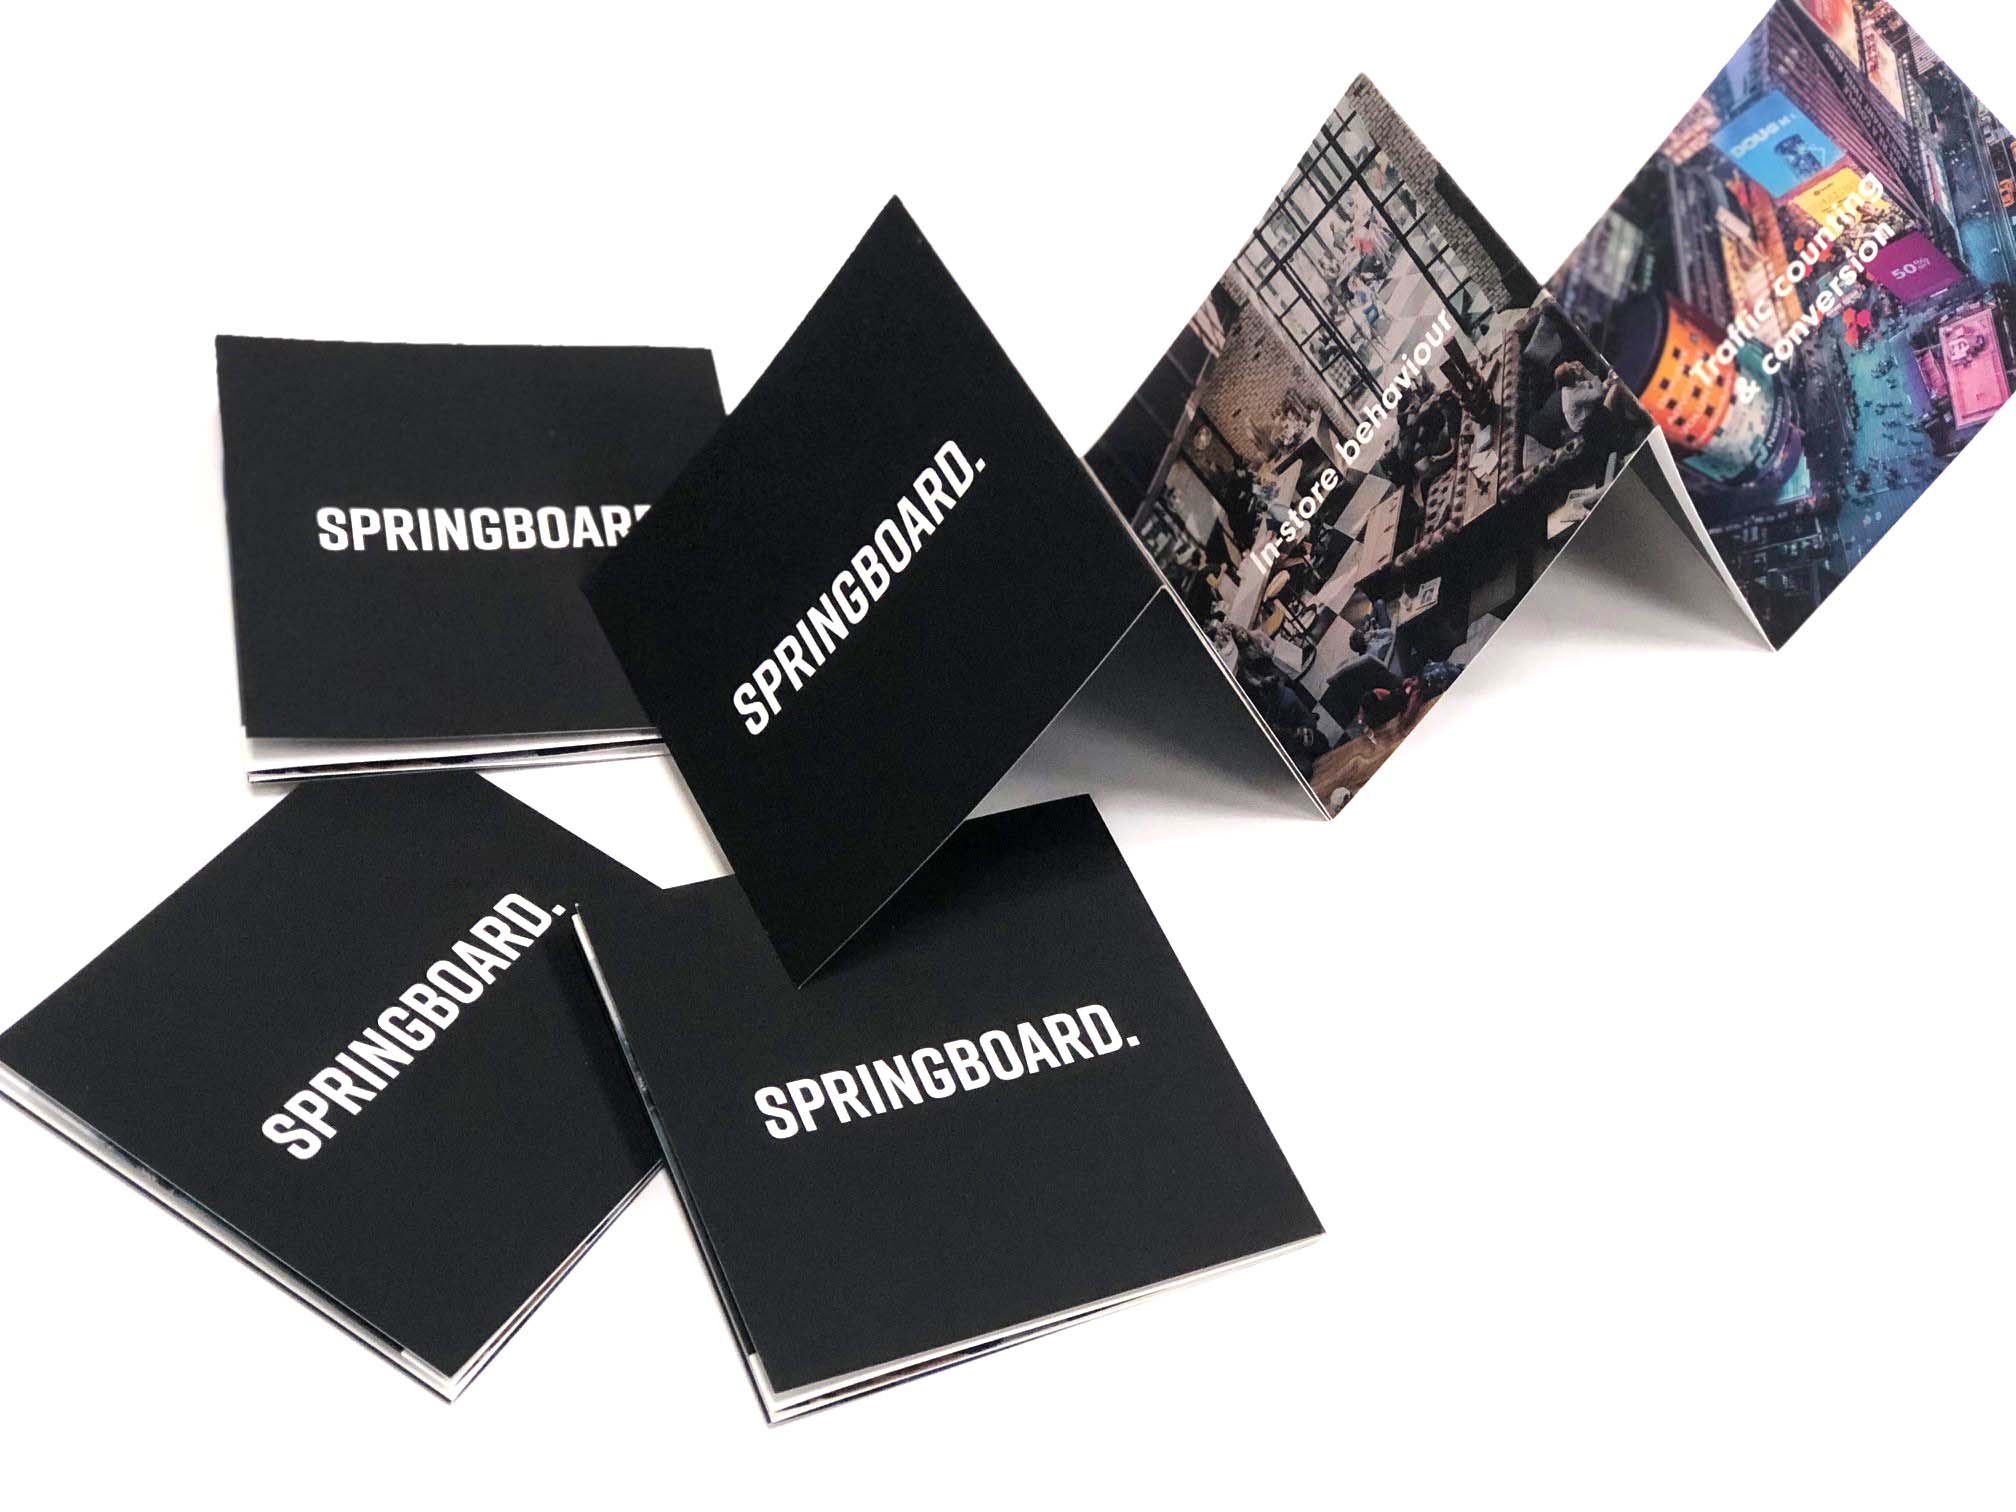 Front cover and inside look at the Springboard leaflet